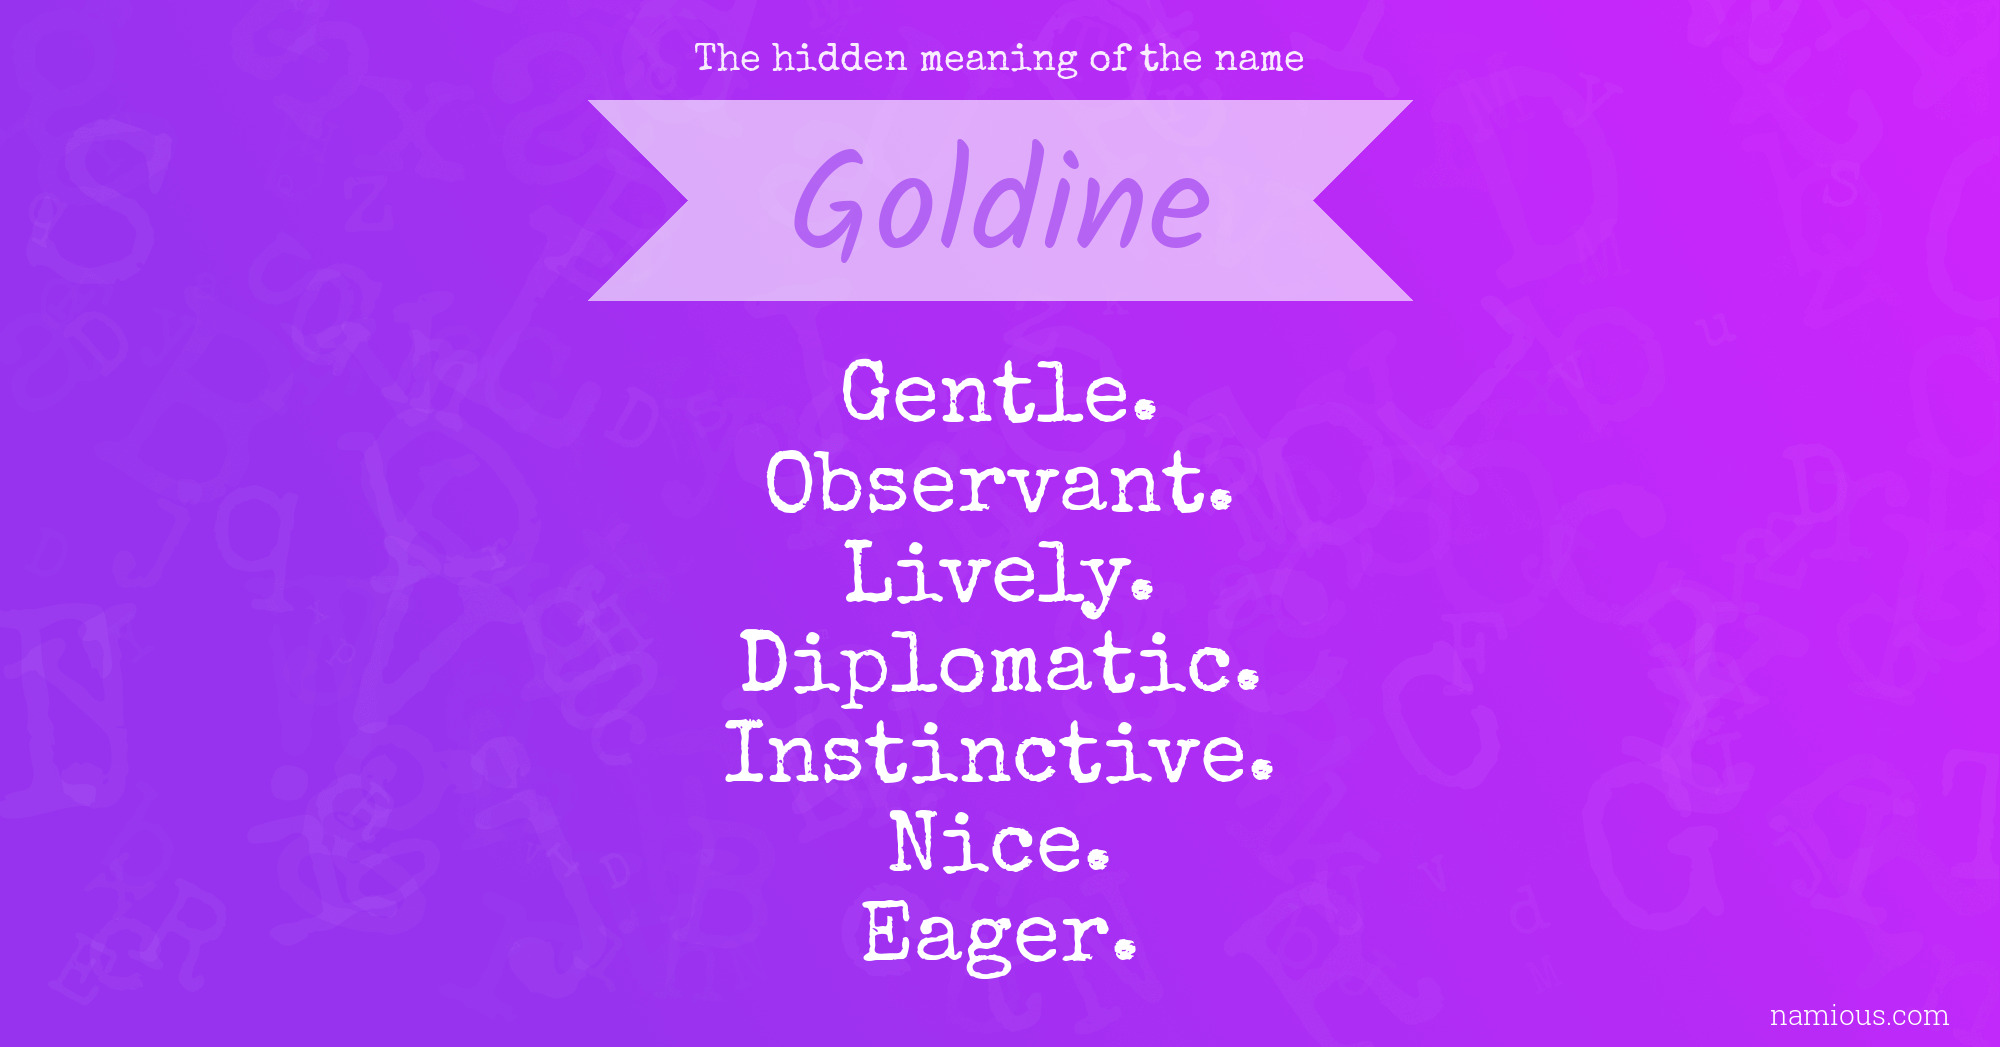 The hidden meaning of the name Goldine